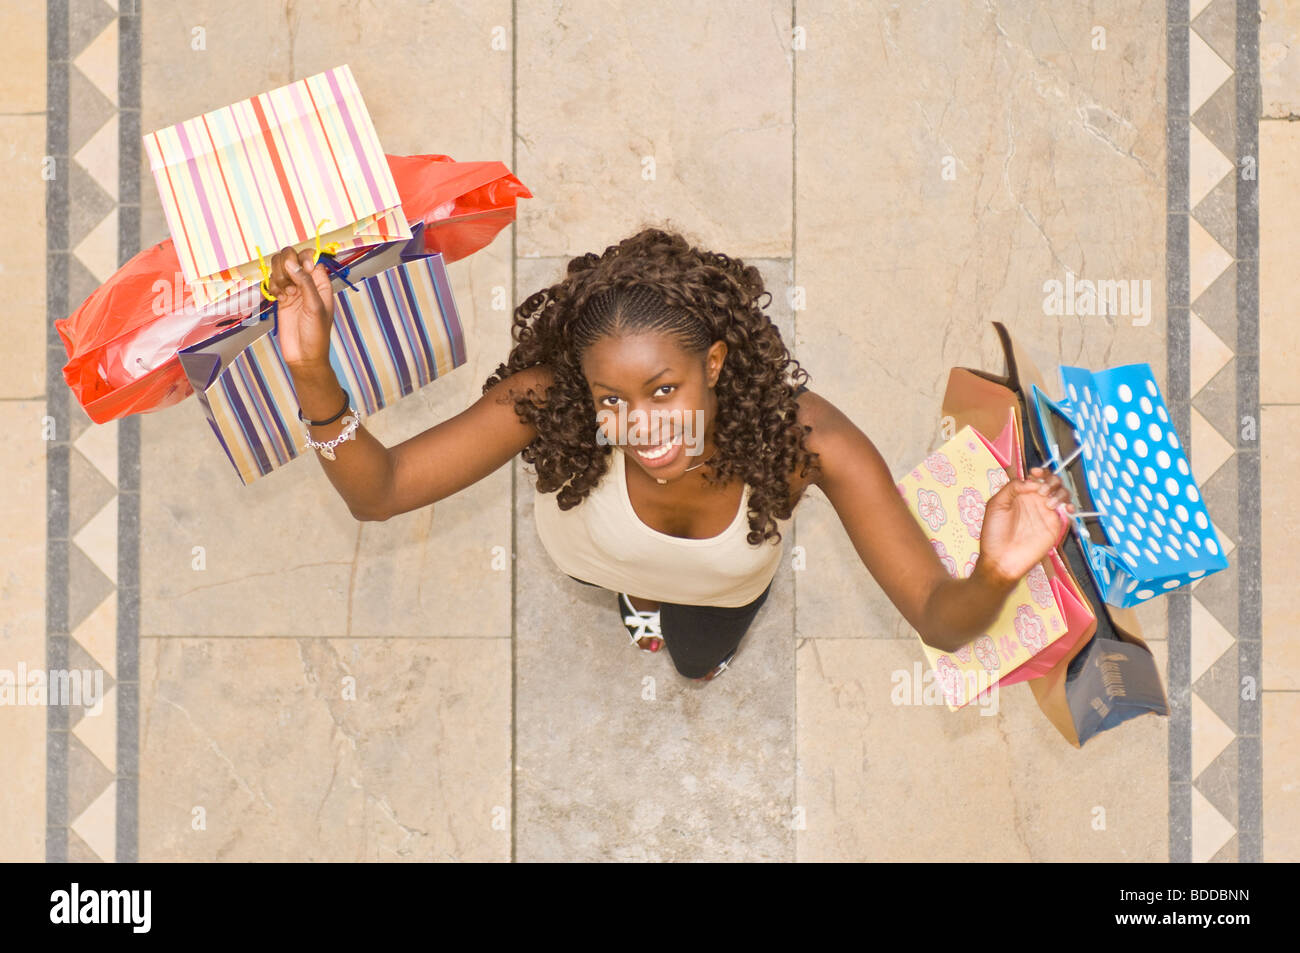 An aerial view of a slim attractive trendy young African woman at a shopping center very happy on a shopping spree. Stock Photo